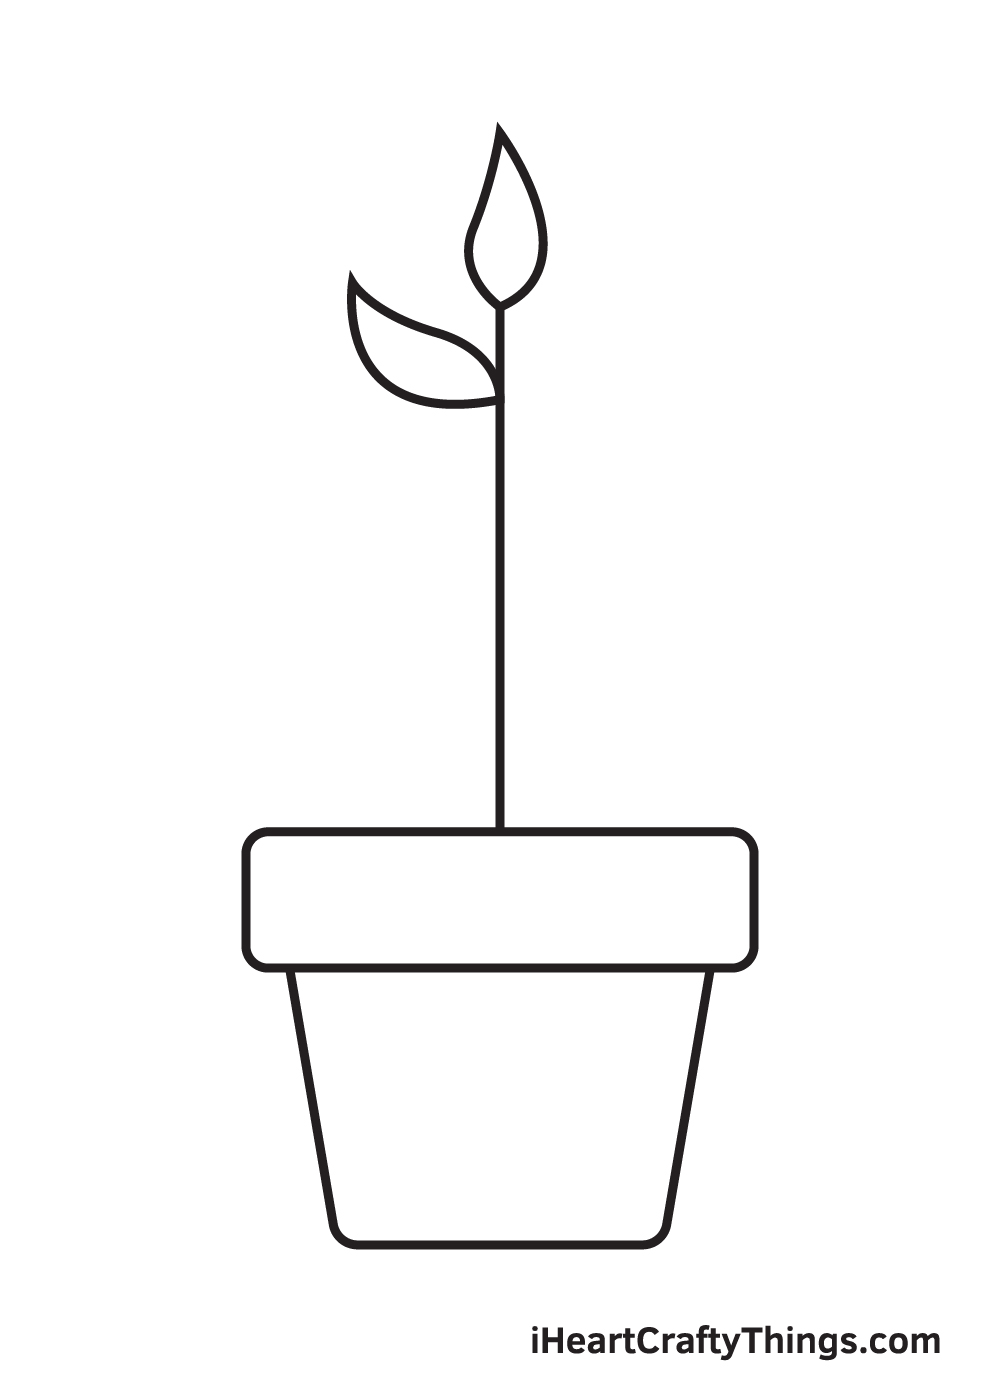 Plant Drawing - Step 4